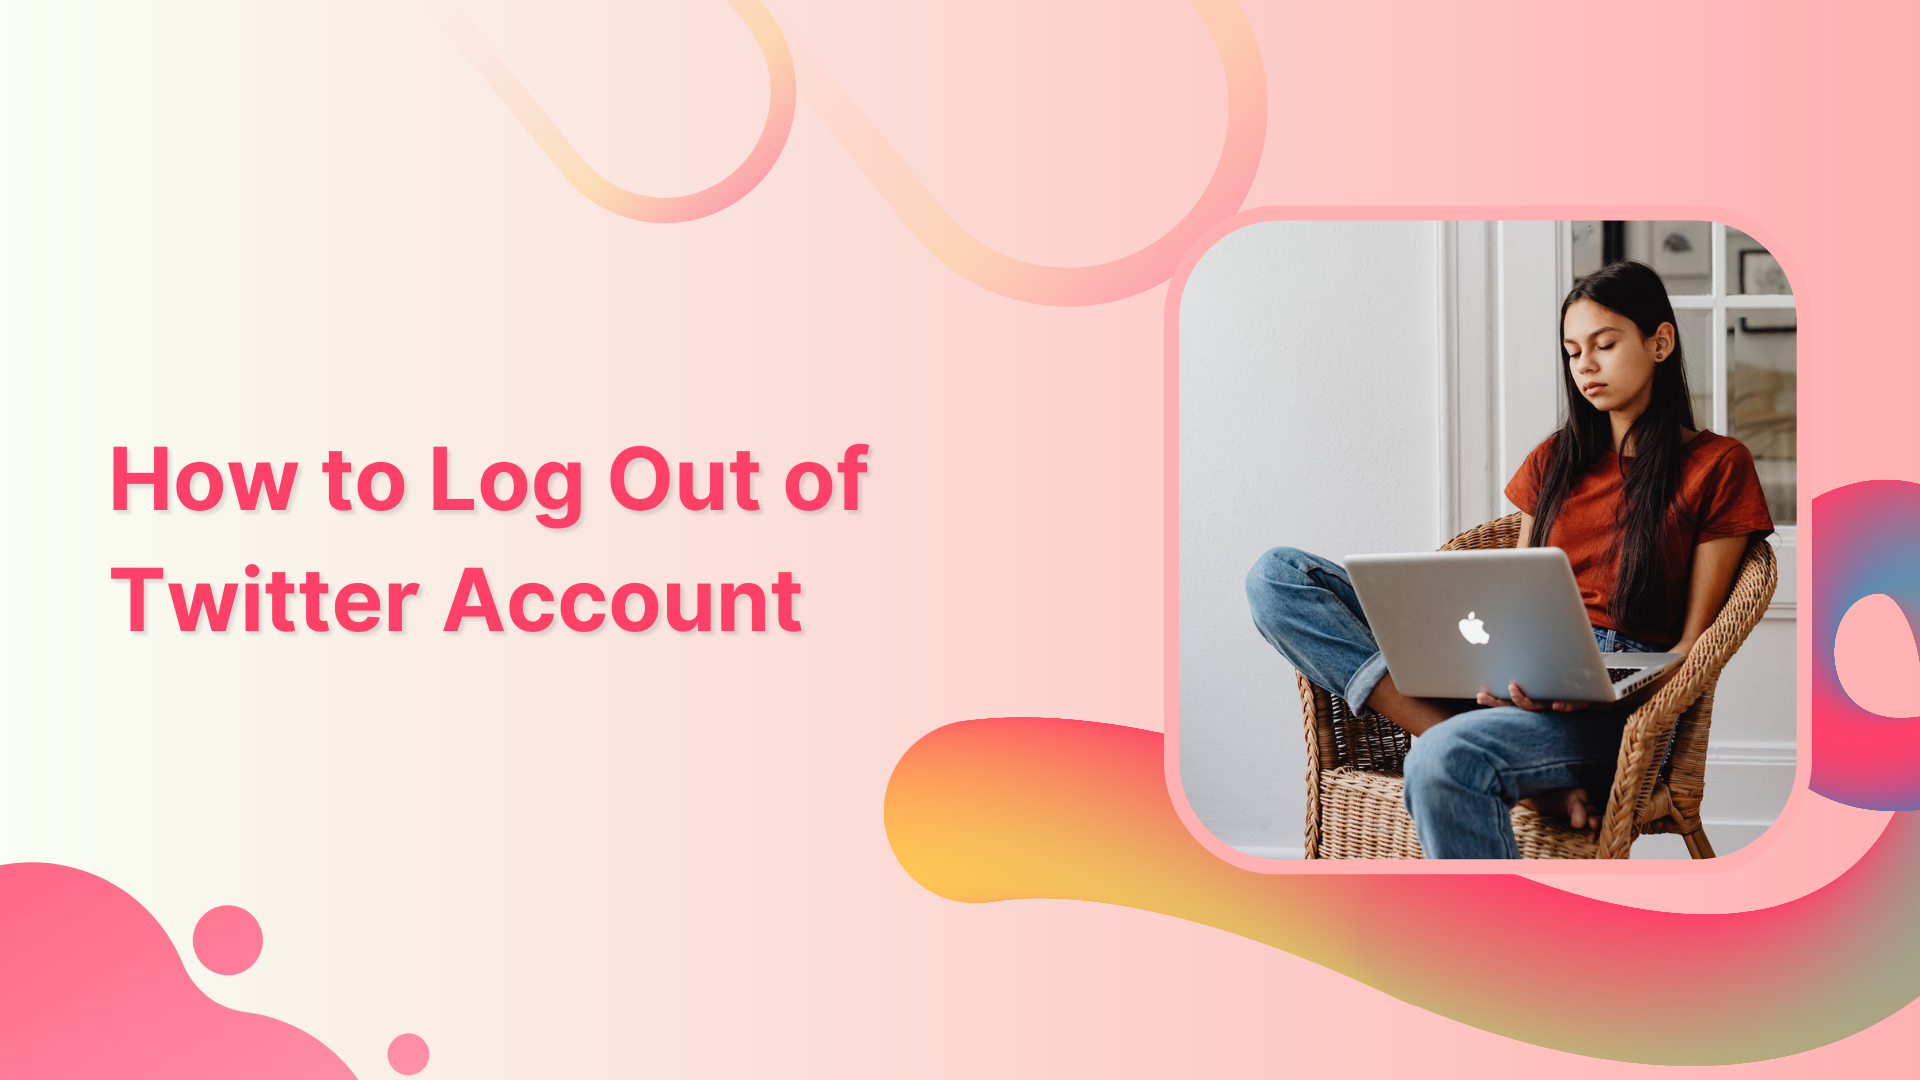 How to Log Out of Twitter Account?